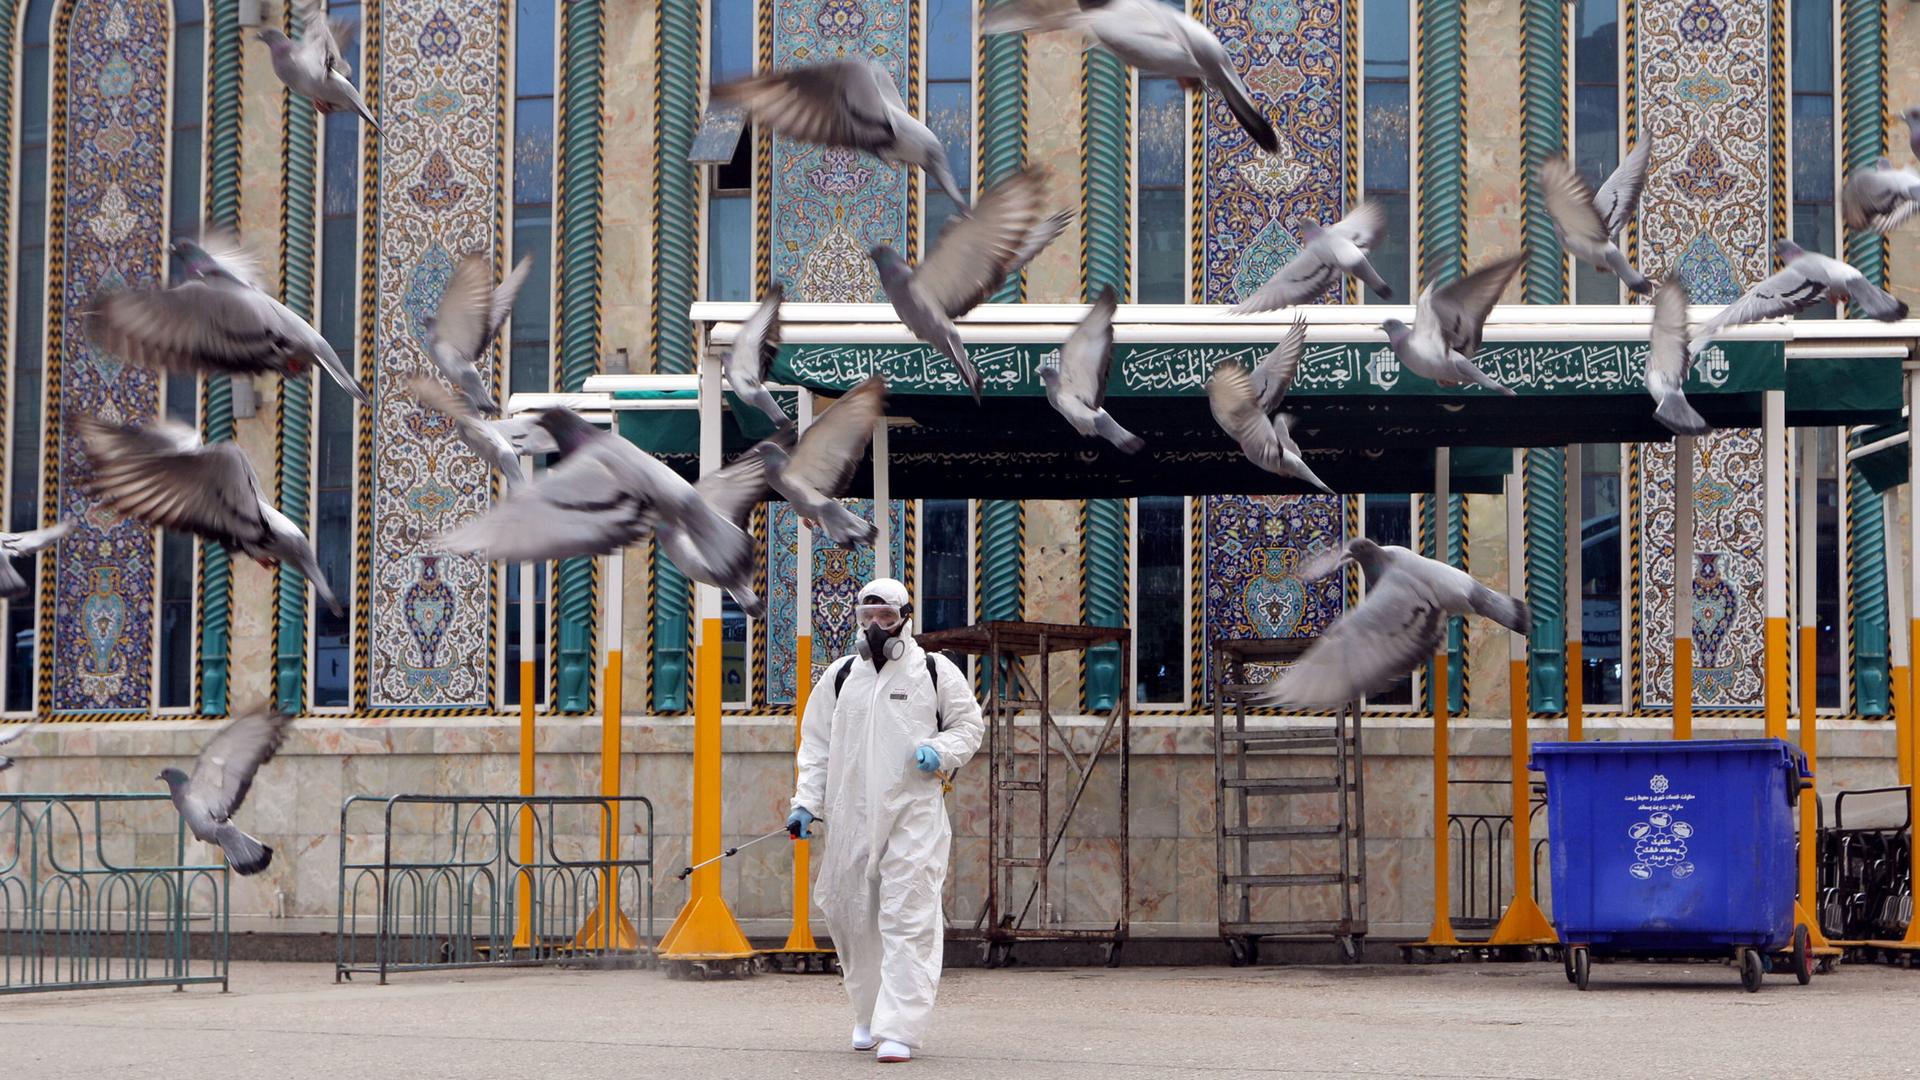 A man is shown wearing a full body protective suit, spraying disinfectant as pigeons fly away.